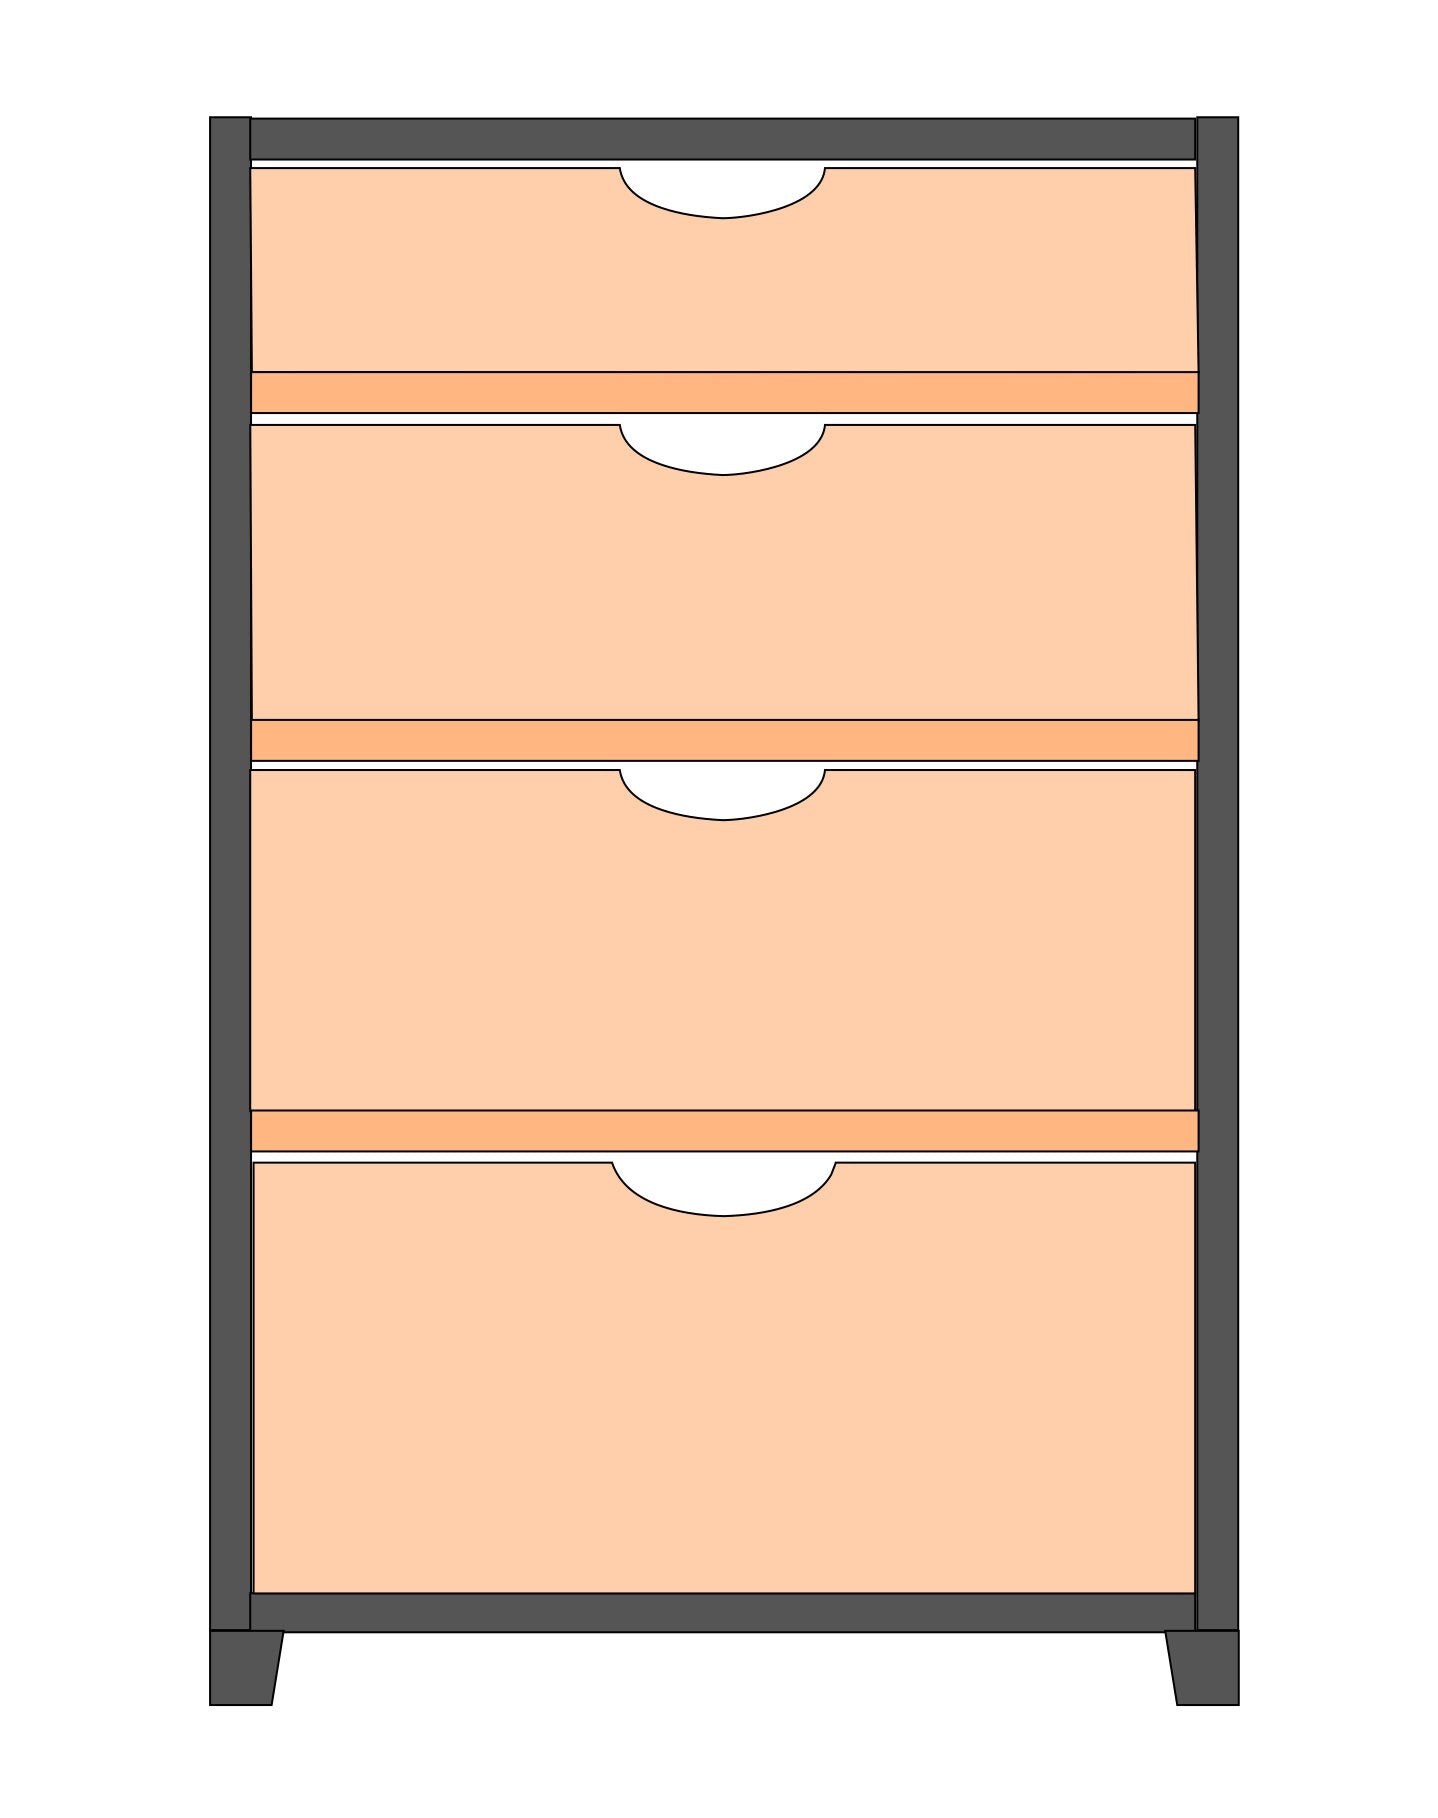 Plans for Under-bench cabinet with Birch ply drawers